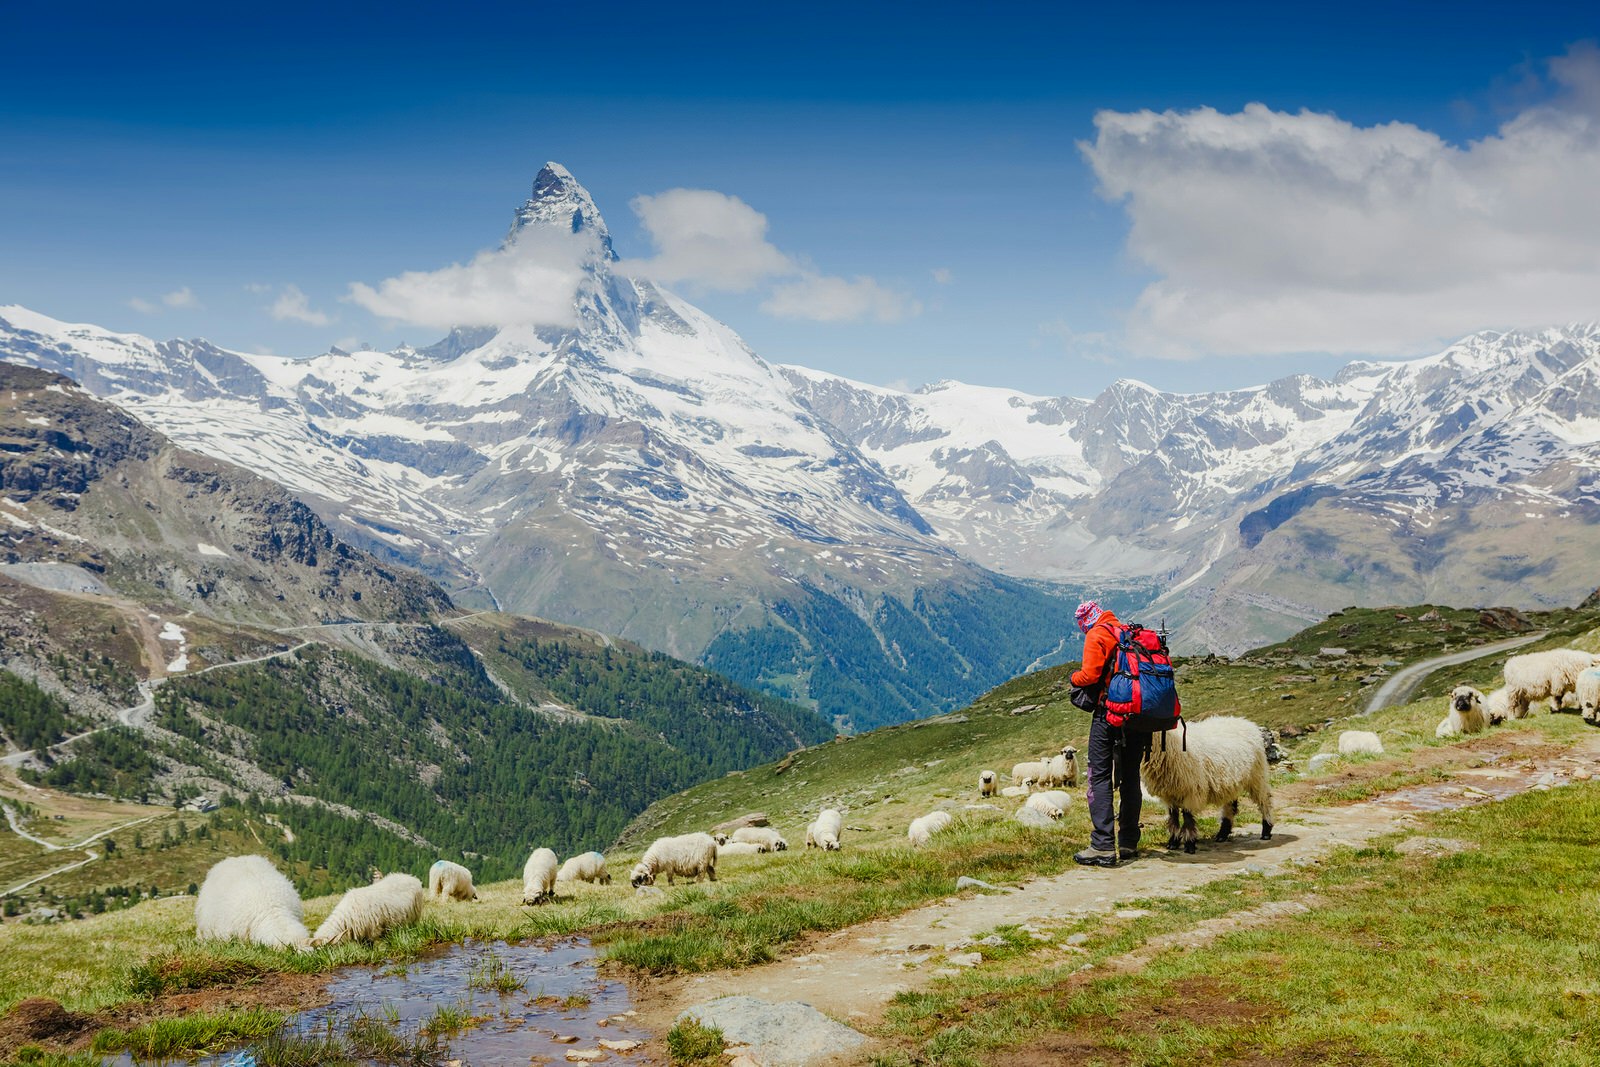 A hiker in full gear stands with a flock of sheep on a mountain with a view of the Matterhorn in the Swiss Alps